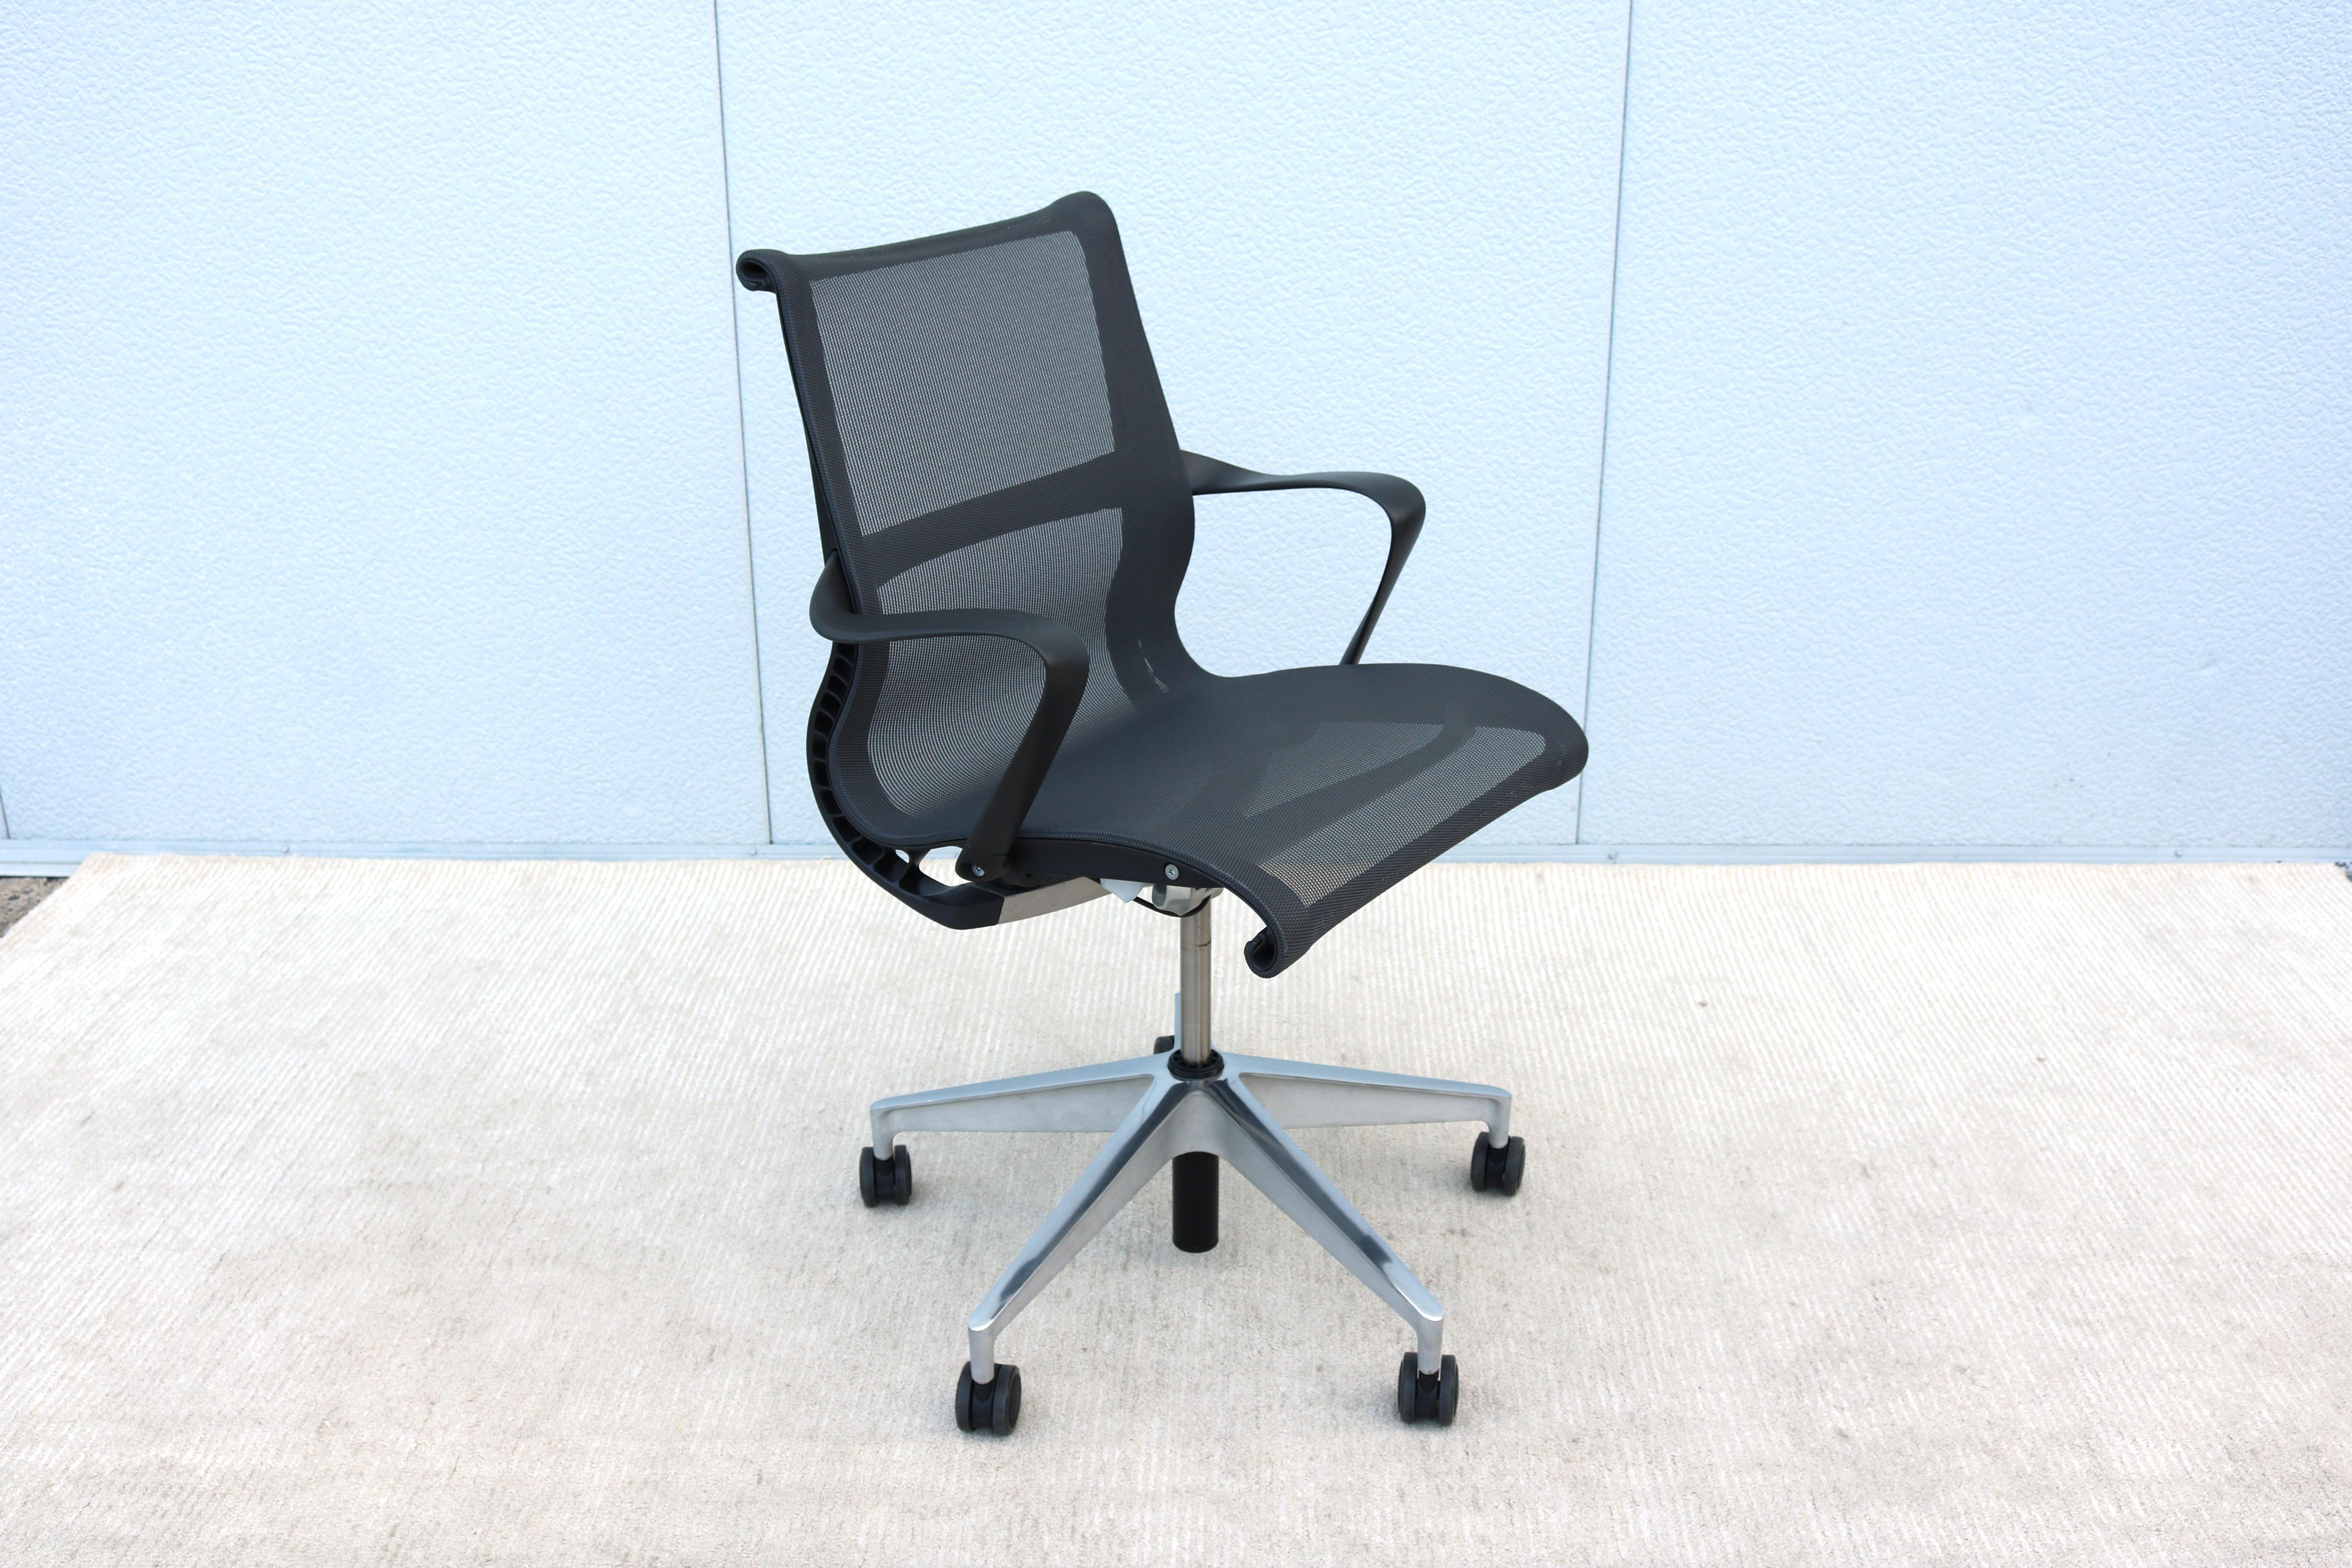 The Setu chair delivers instant comfort for anyone from the moment you sit down. Best of NeoCon Gold 2009.
One-piece seat and back breathable and pliable mesh fabric, that adapts to your sitting providing comfort and aeration.
Have a built-in